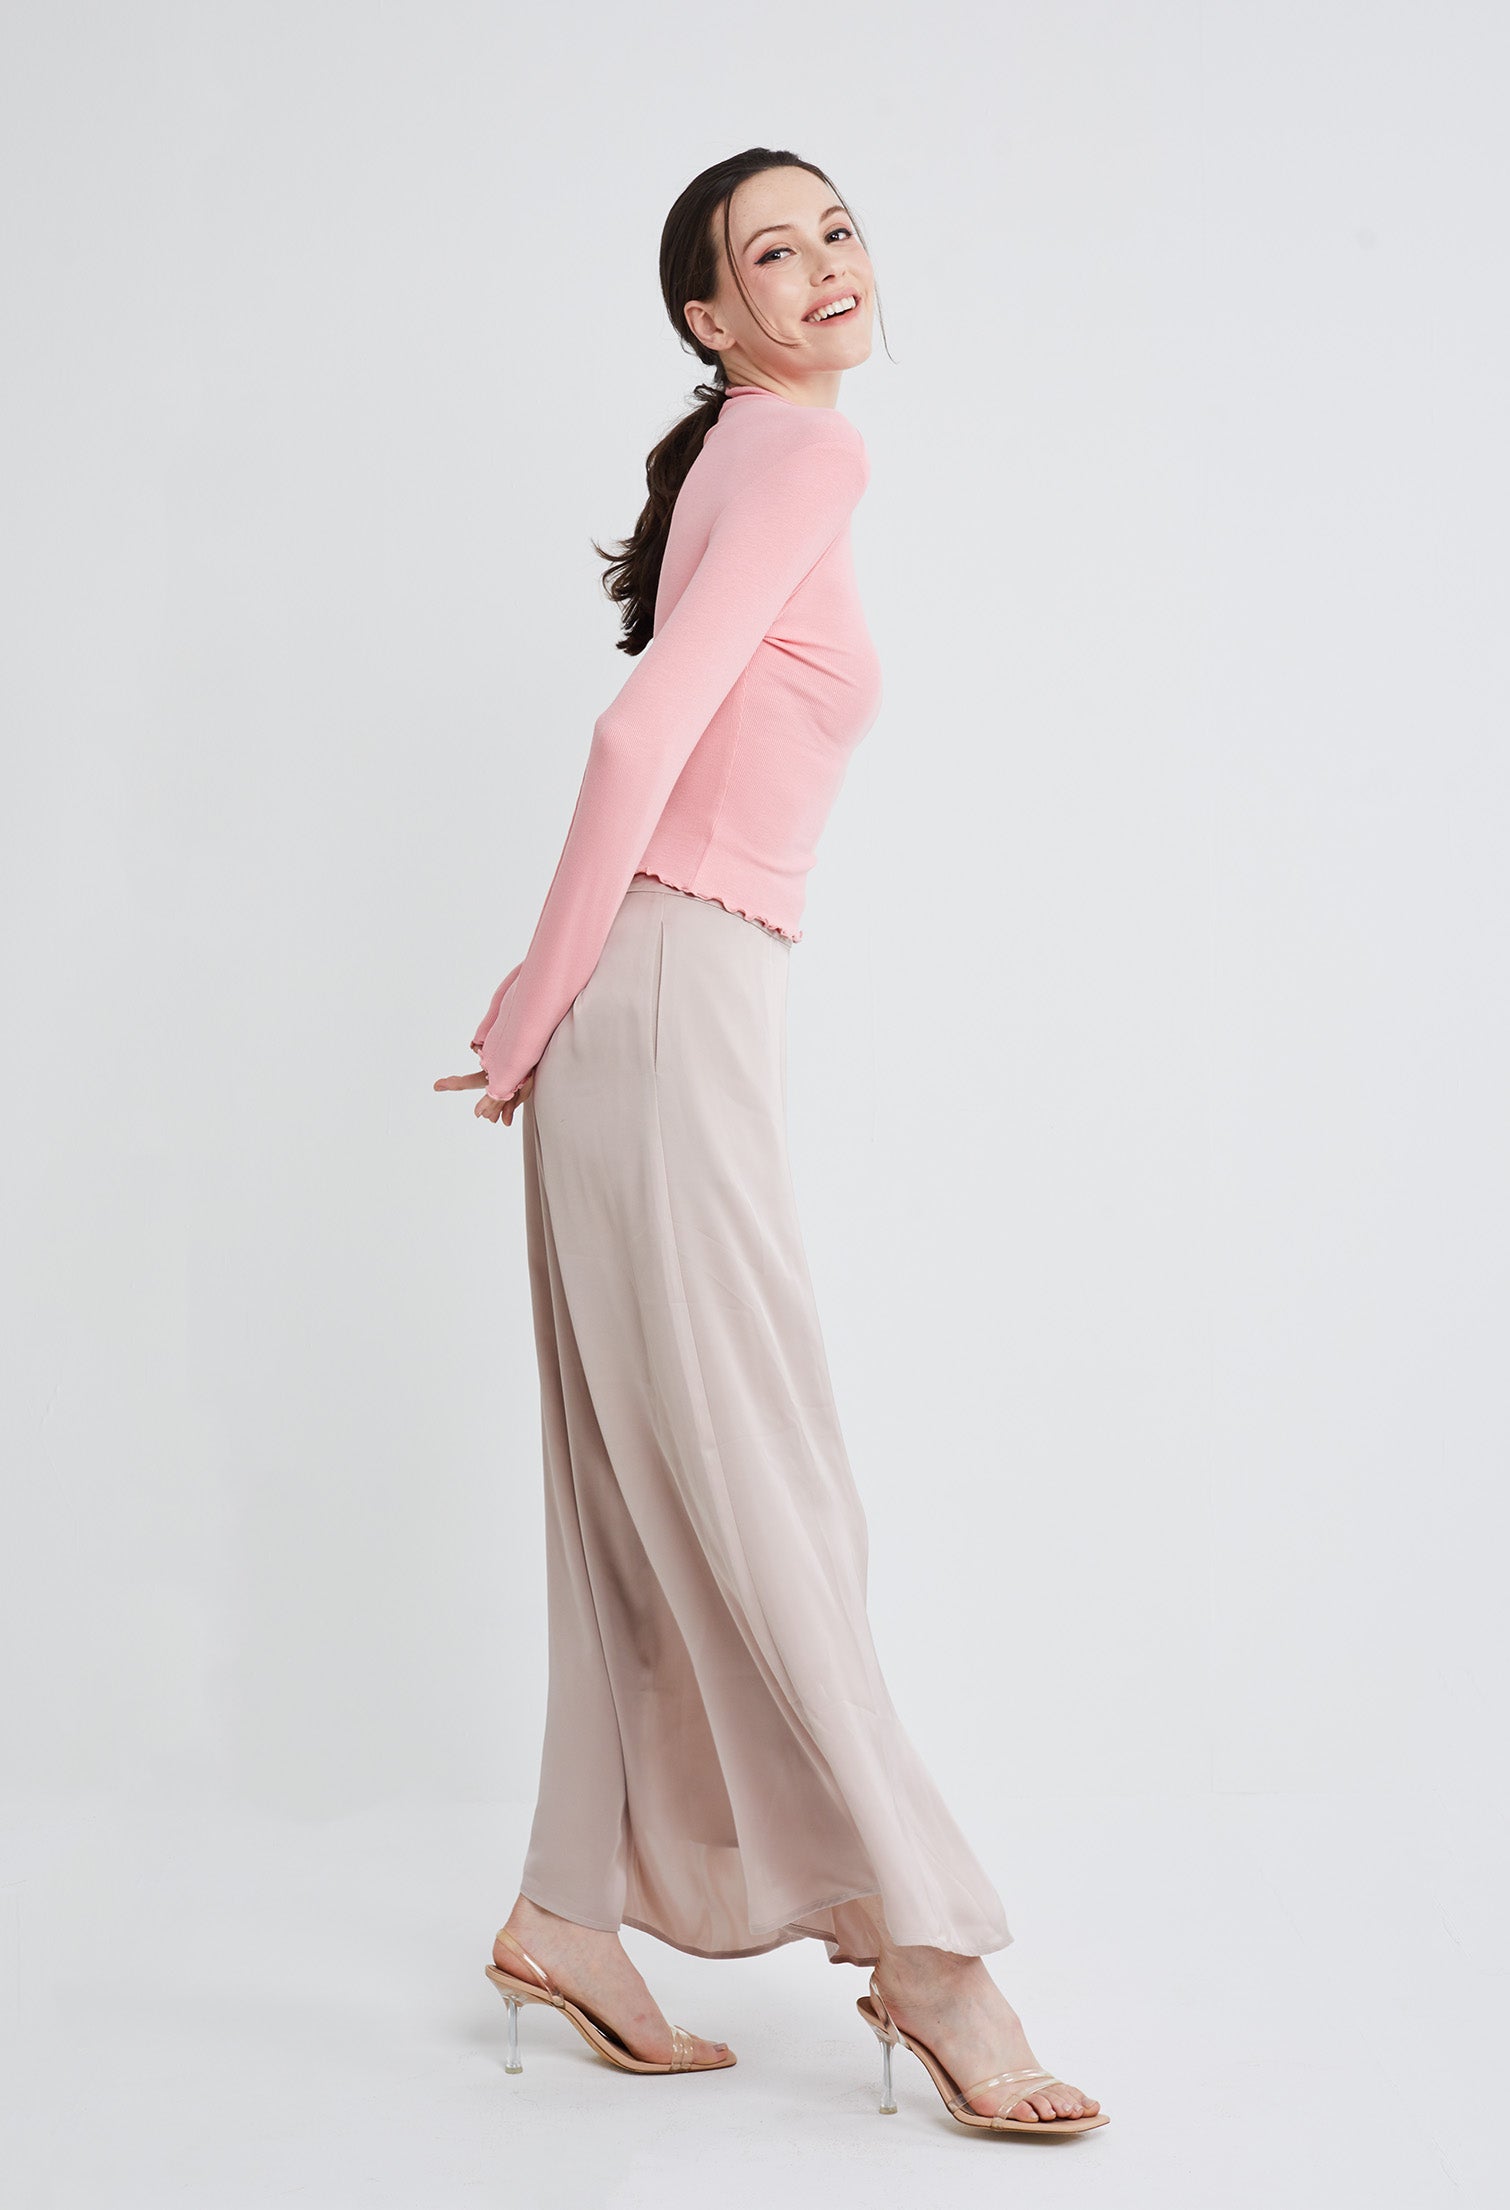 Frilled Turtleneck Inner Fitted Top